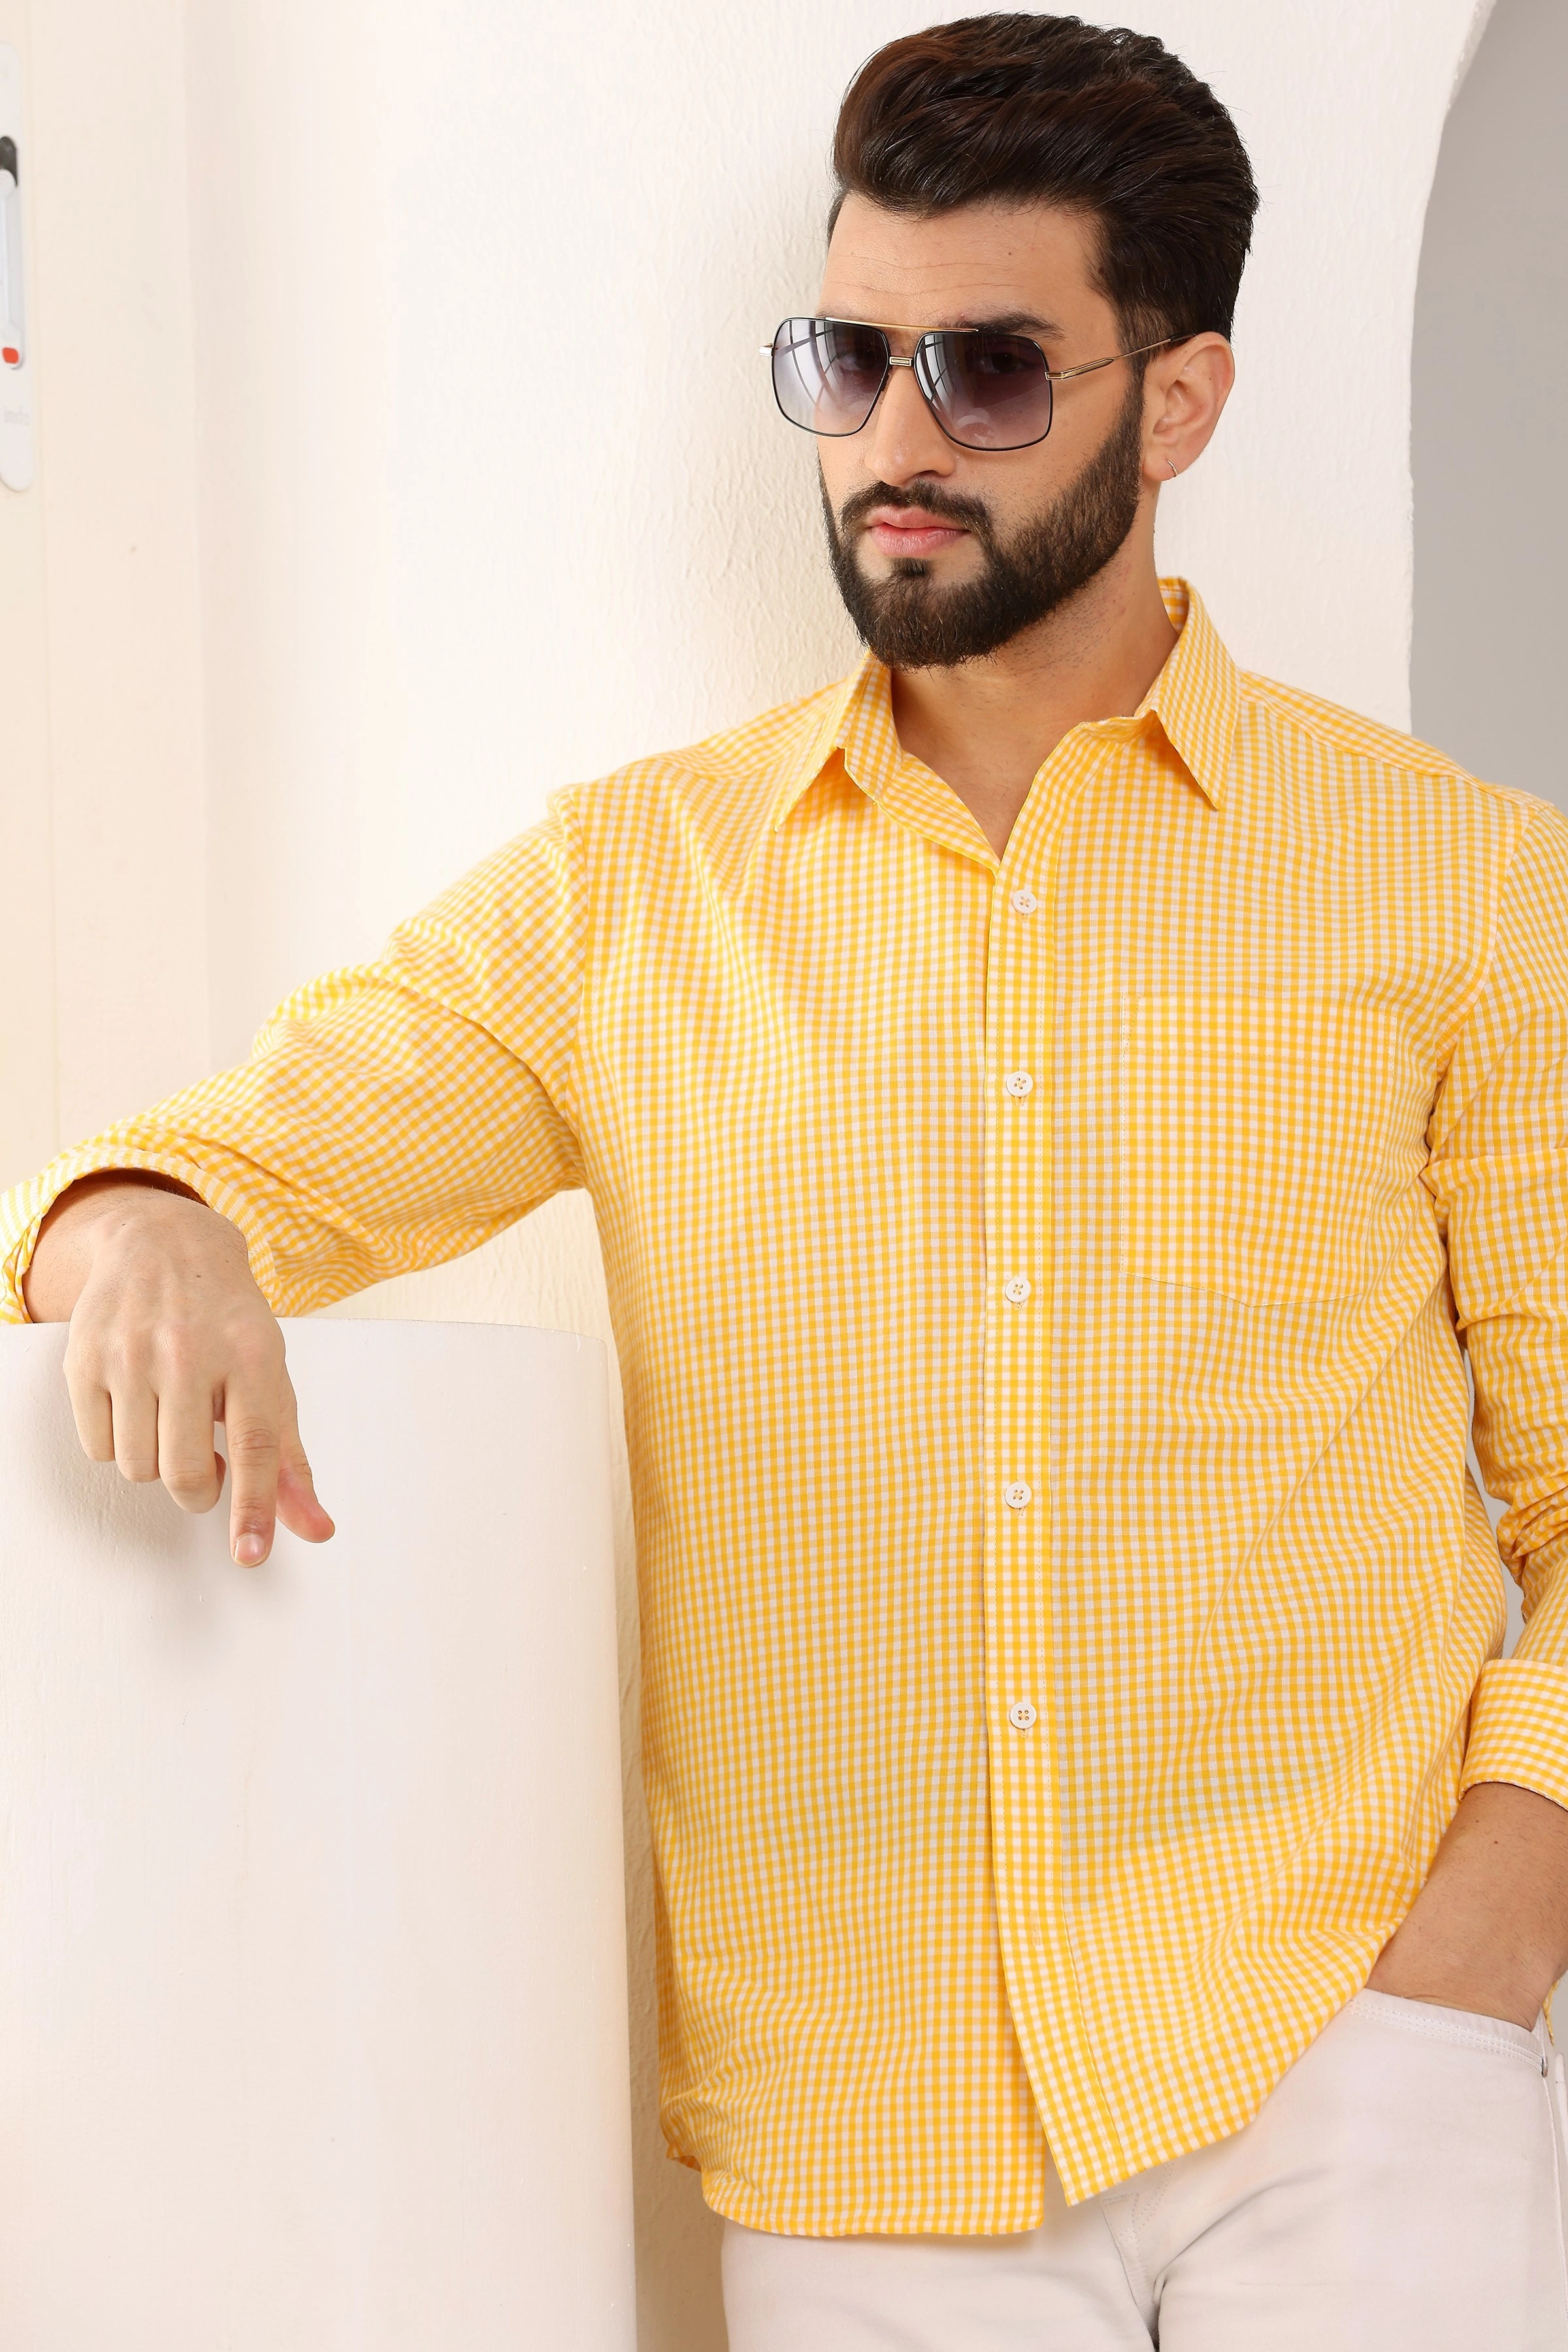 Gingham Sports Cotton Shirts Yellow And White-S-5